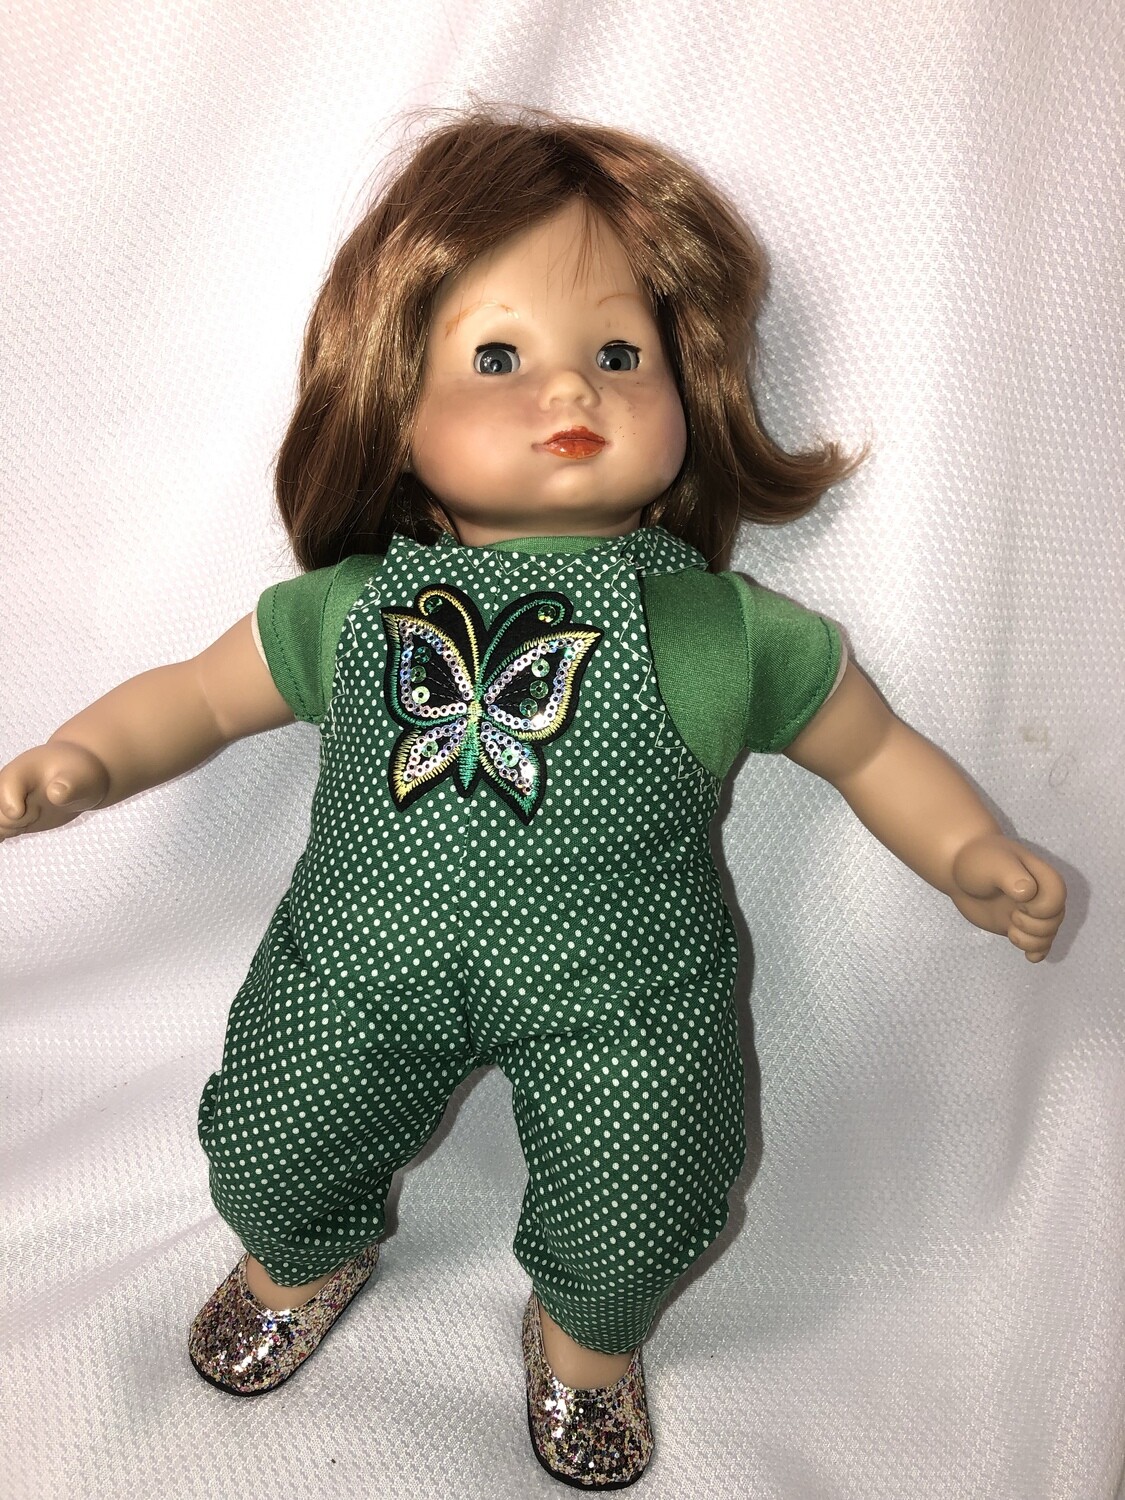 Kacie: OOAK doll with Bitty Baby PC Doll head. Clean body, home made outfit. Face mark as noted.

